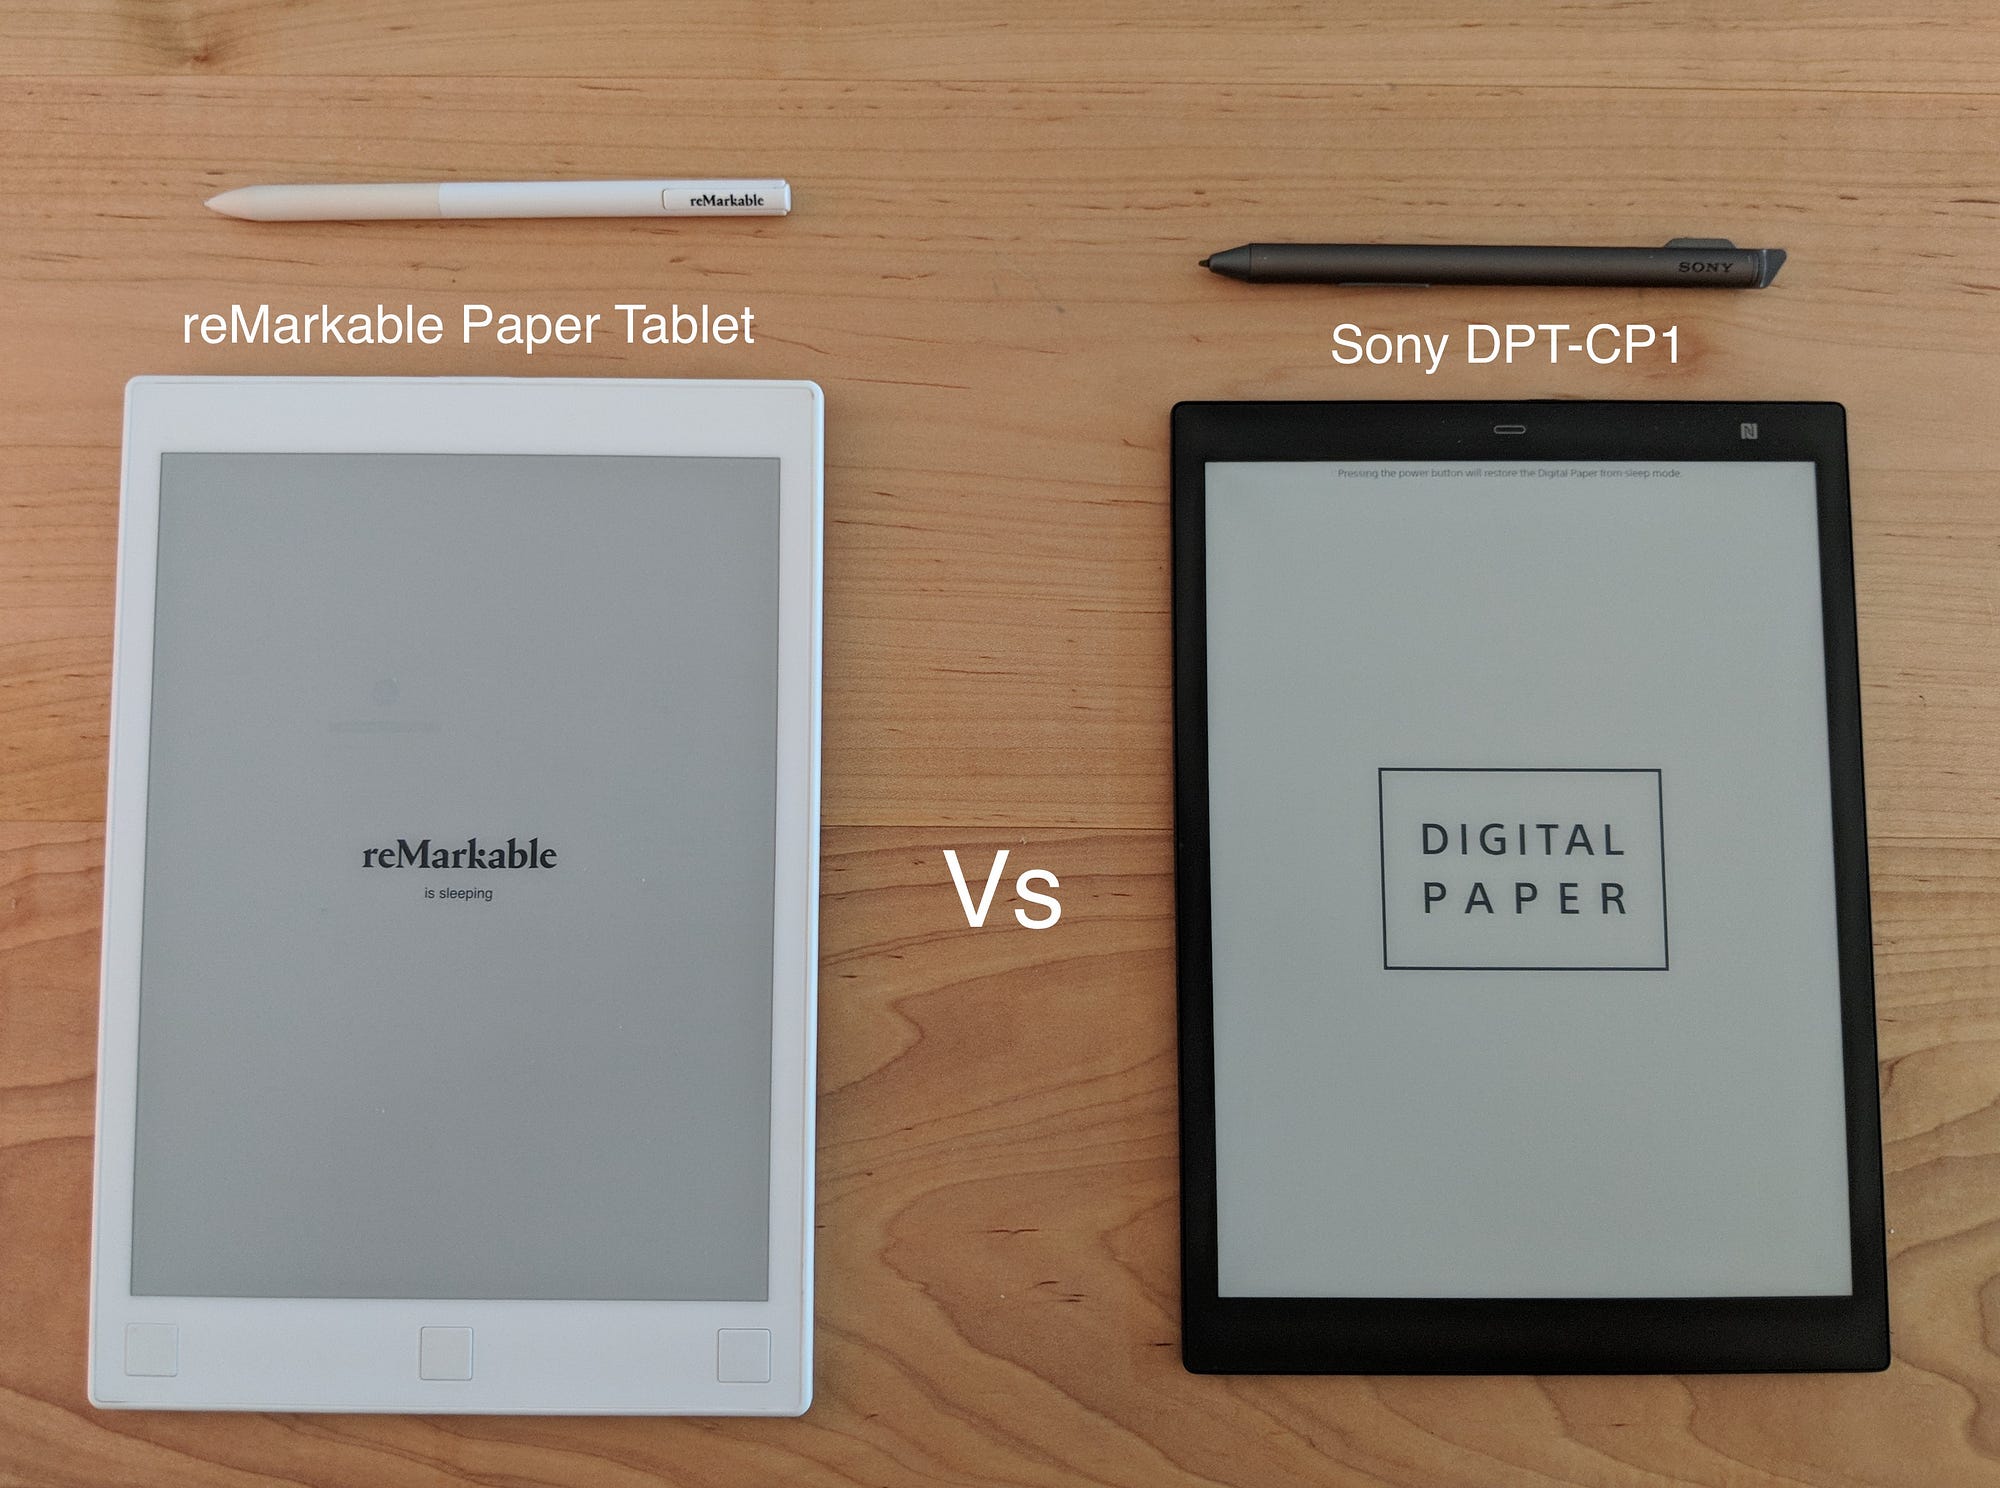 The Sony DPT CP1 Digital Paper Tablet versus the reMarkable Paper